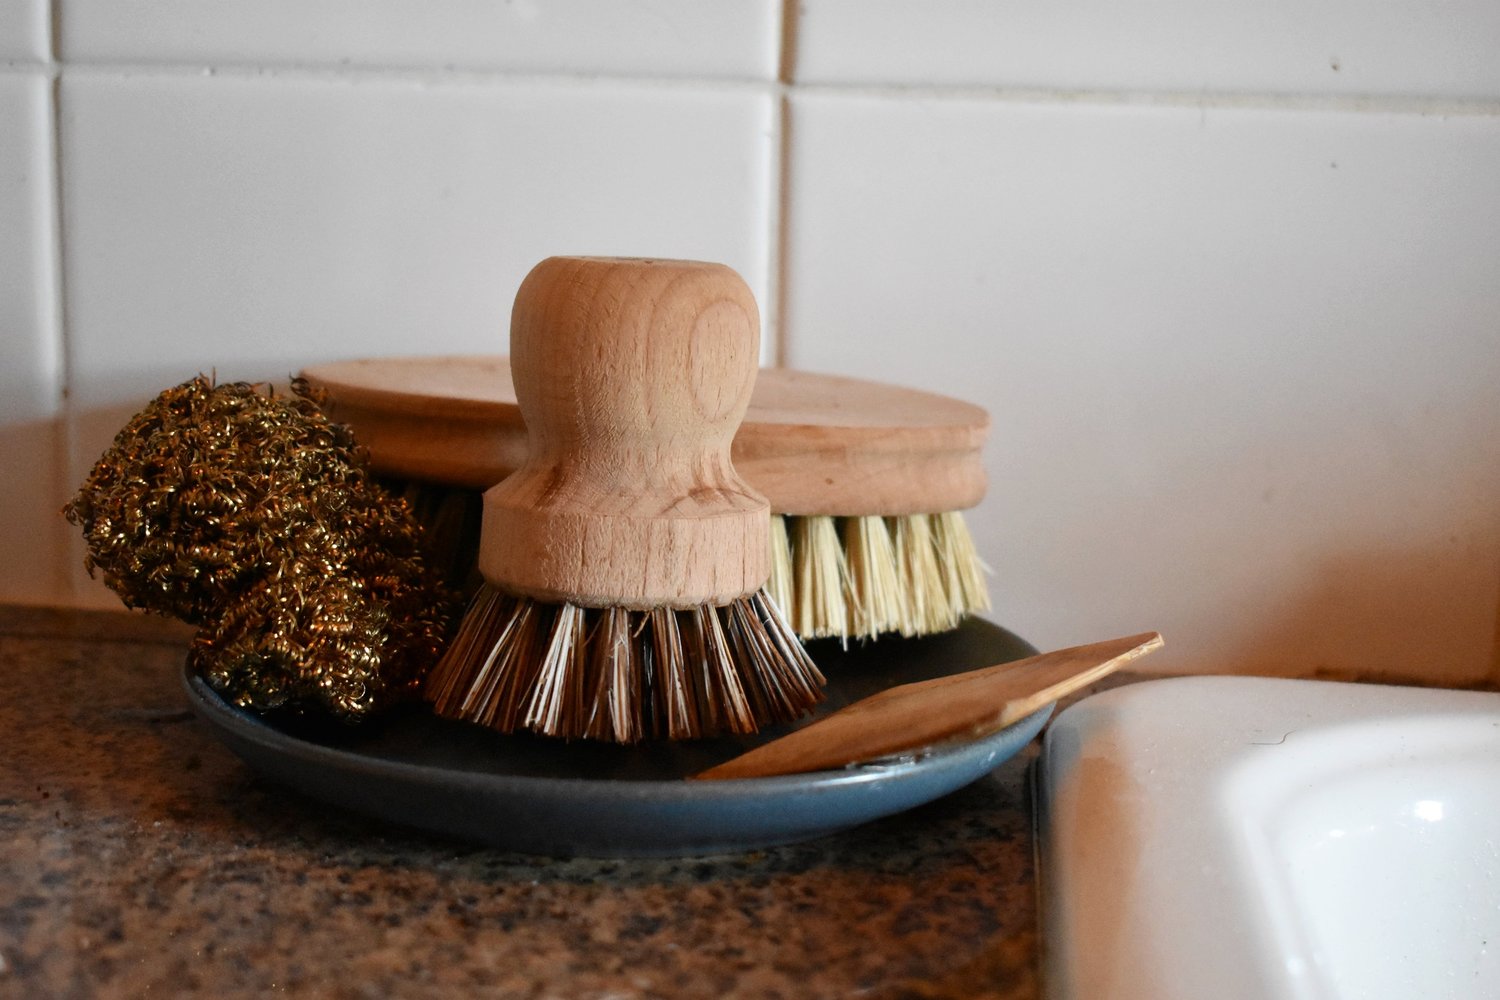 Your Sponge is Gross — Note to Trash